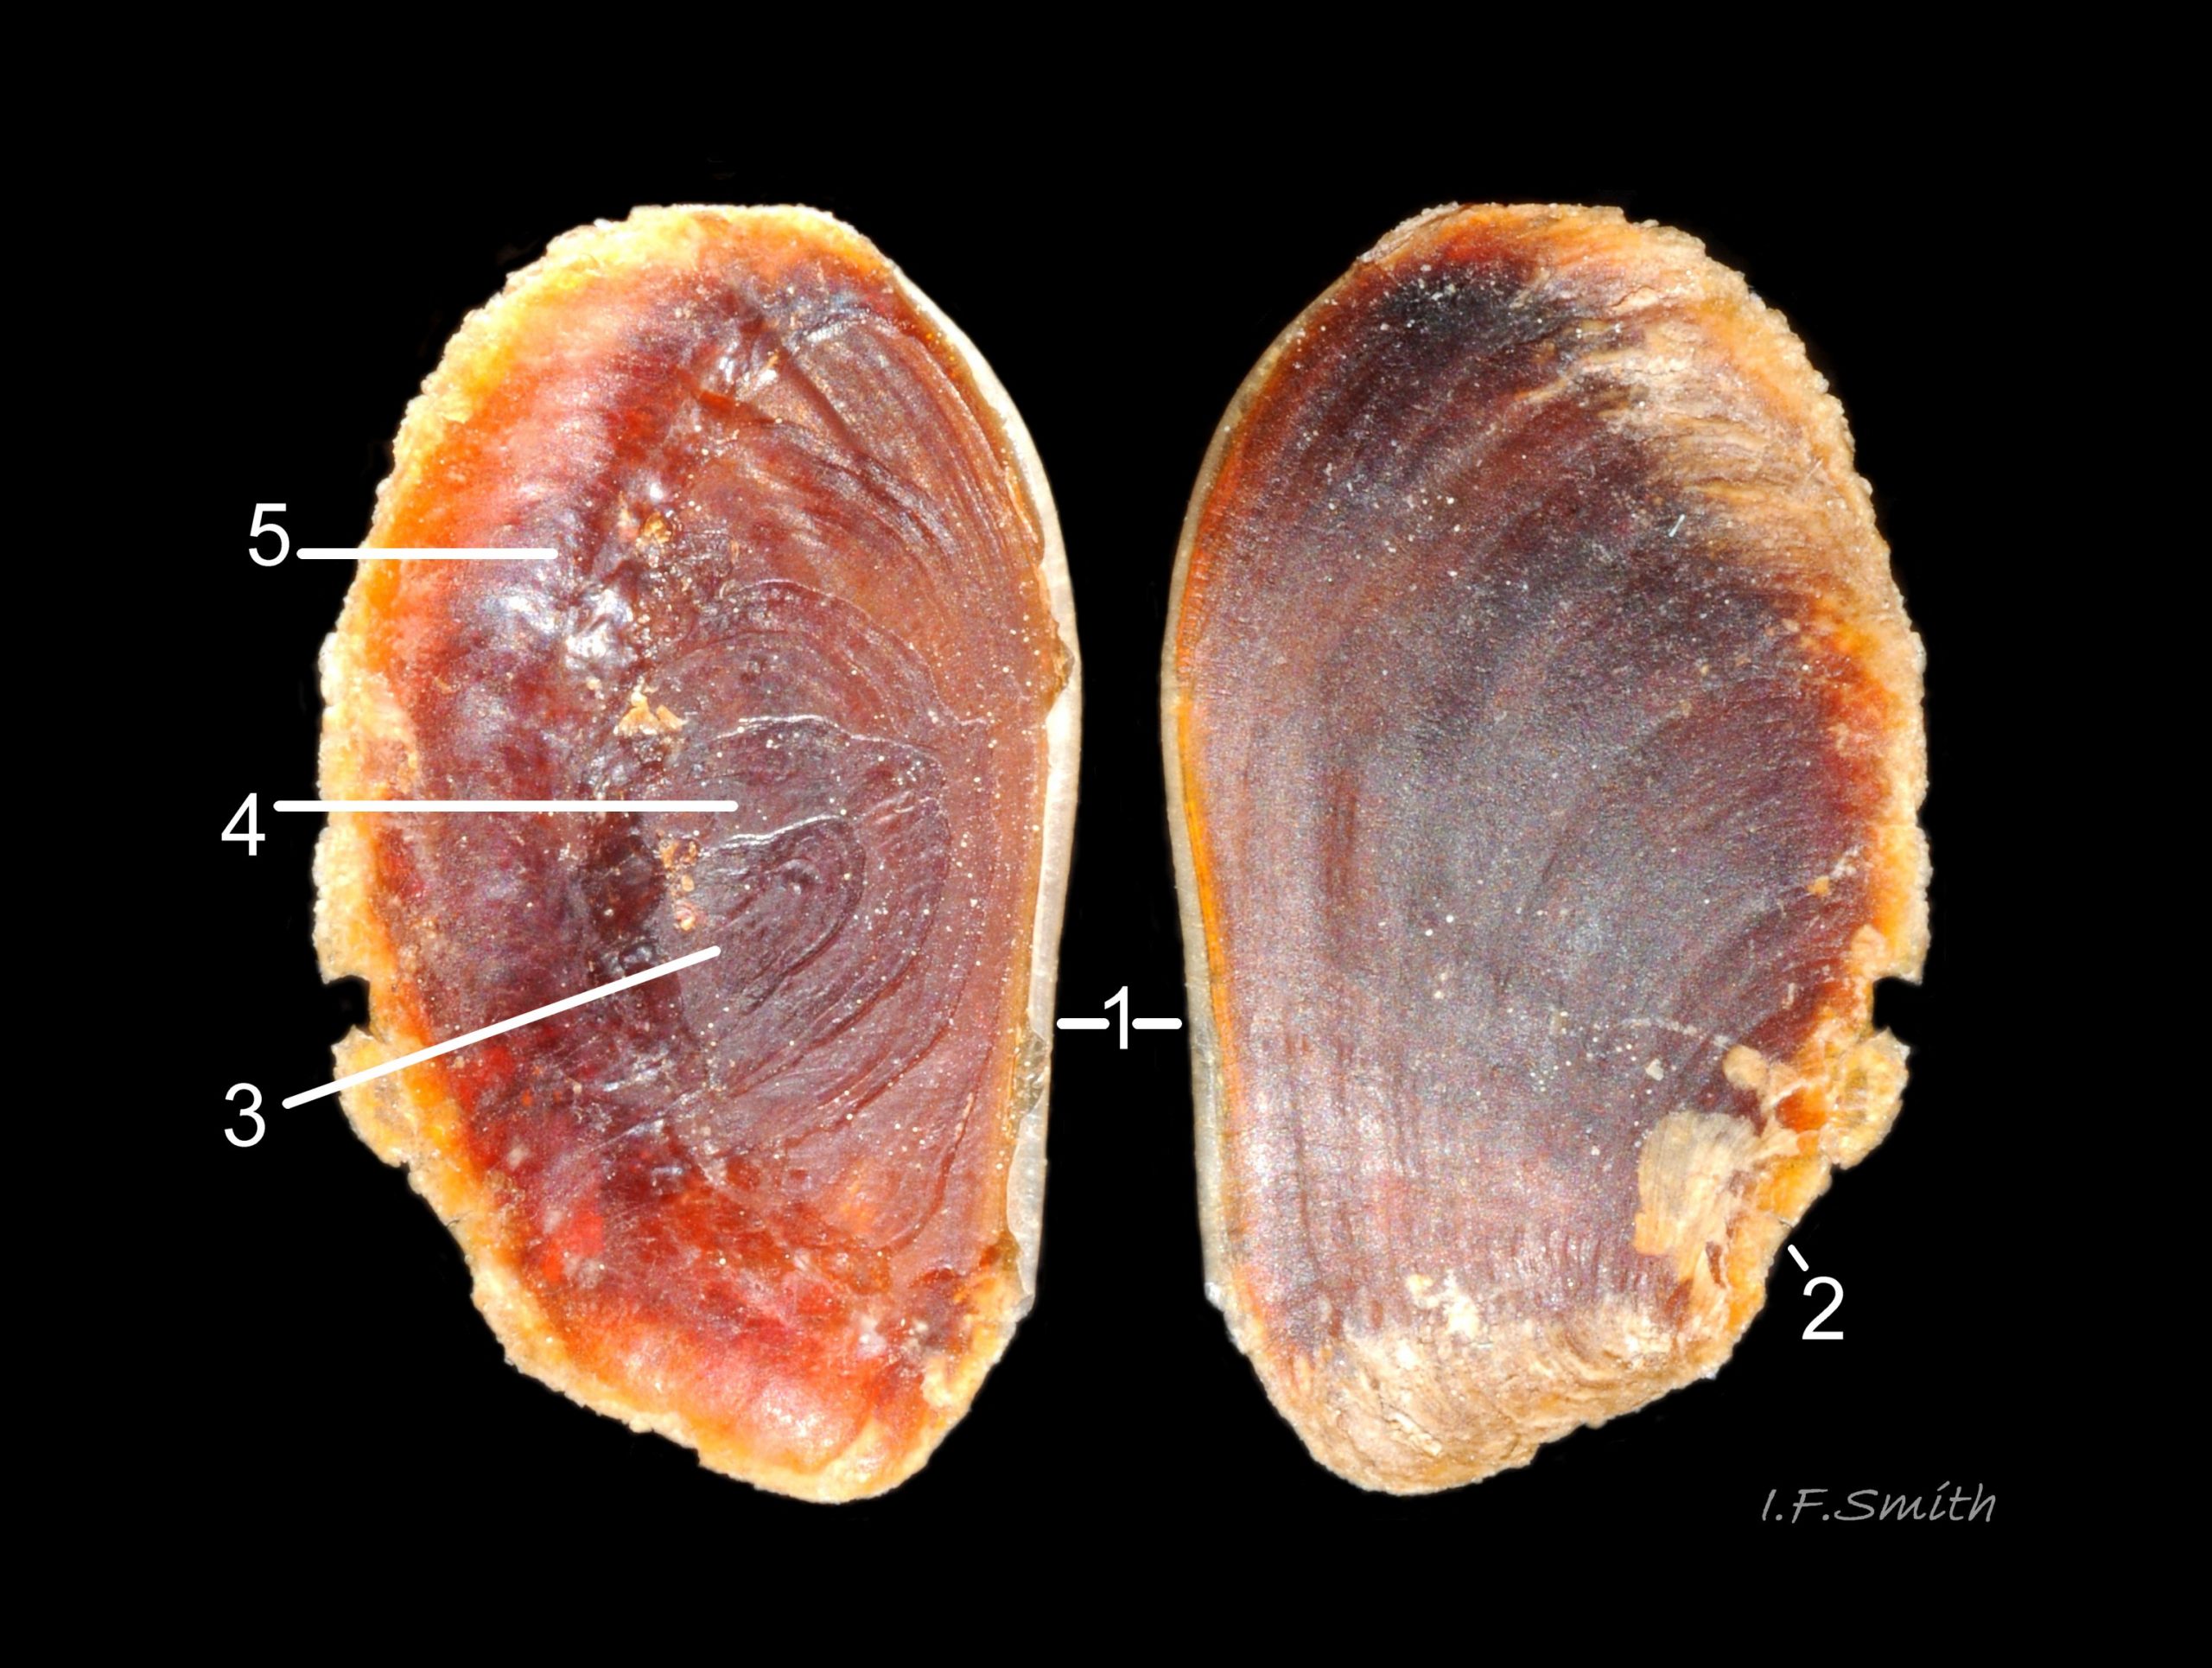 20 Nucella lapillus. Operculum 9.5mm long from adult with shell 40.6mm high. Menai Strait, Wales. June 2013.